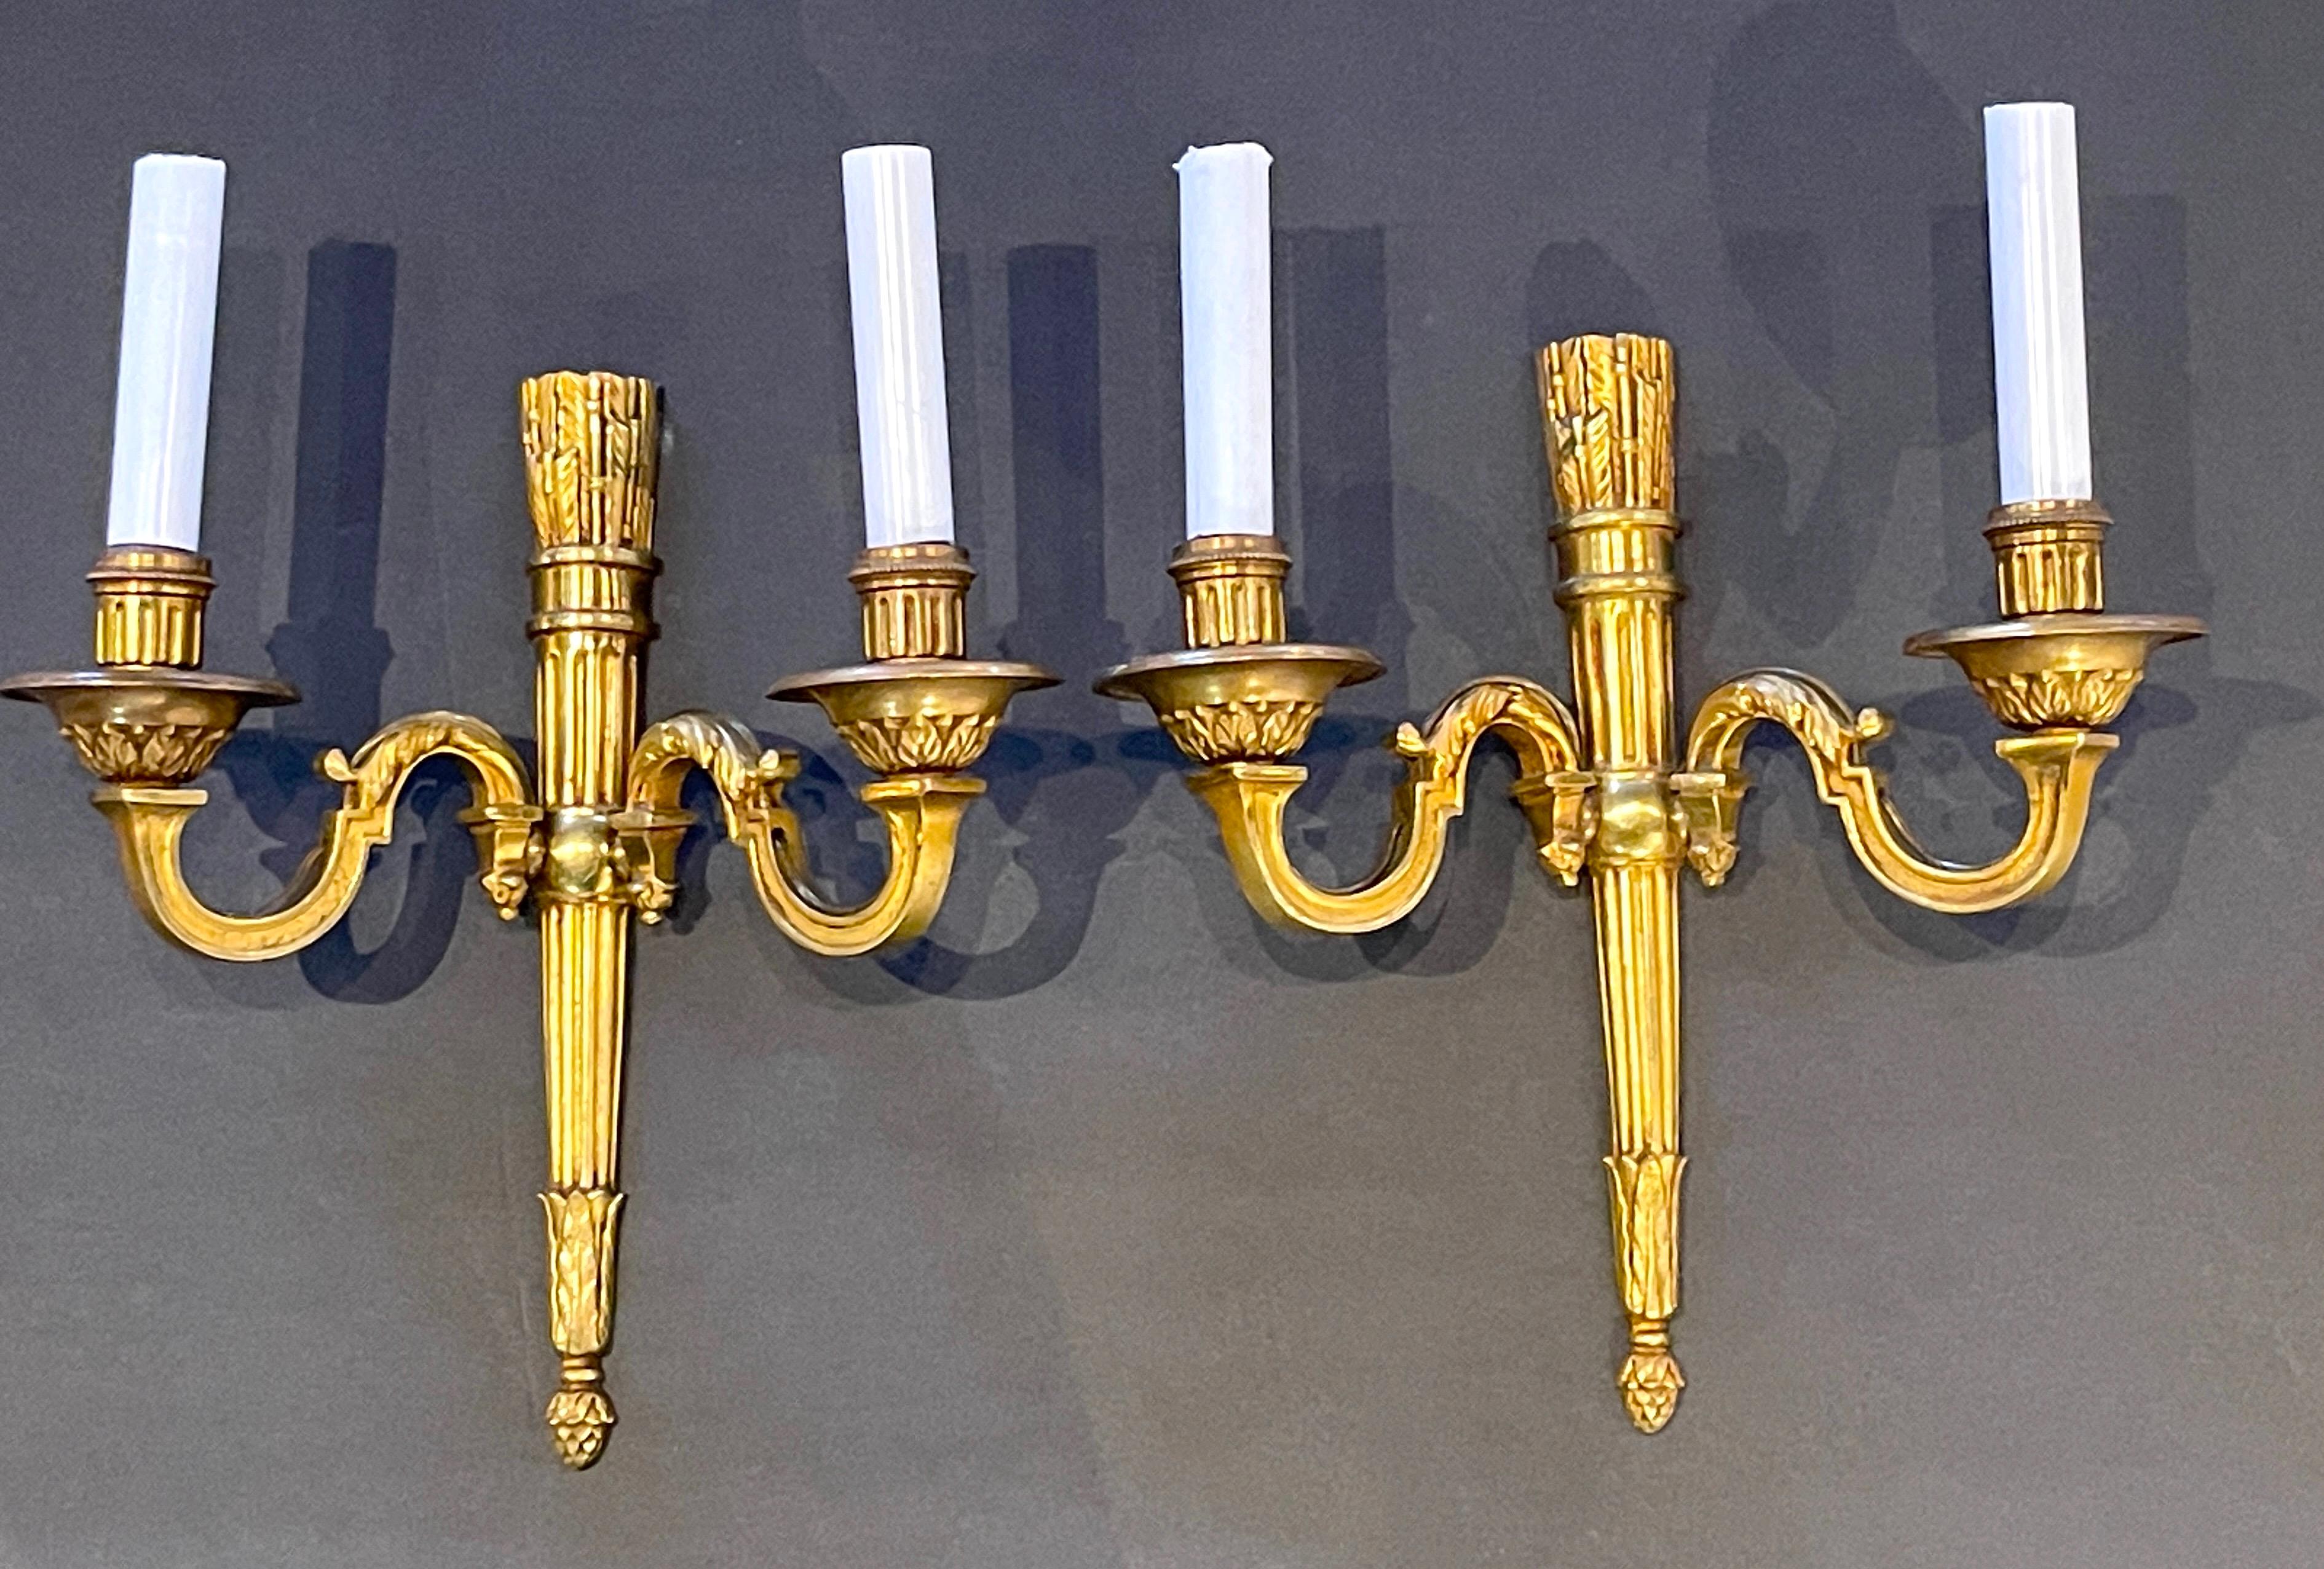 Pair of late 19th century French Ormolu Neoclassical- Regence Stye sconces.
Paris Foundry, circa 1880-1899

A beautiful, well proportioned finely cast pair of ormolu sconces in the Neoclassical style. The quiver and arrow backplate, supports the